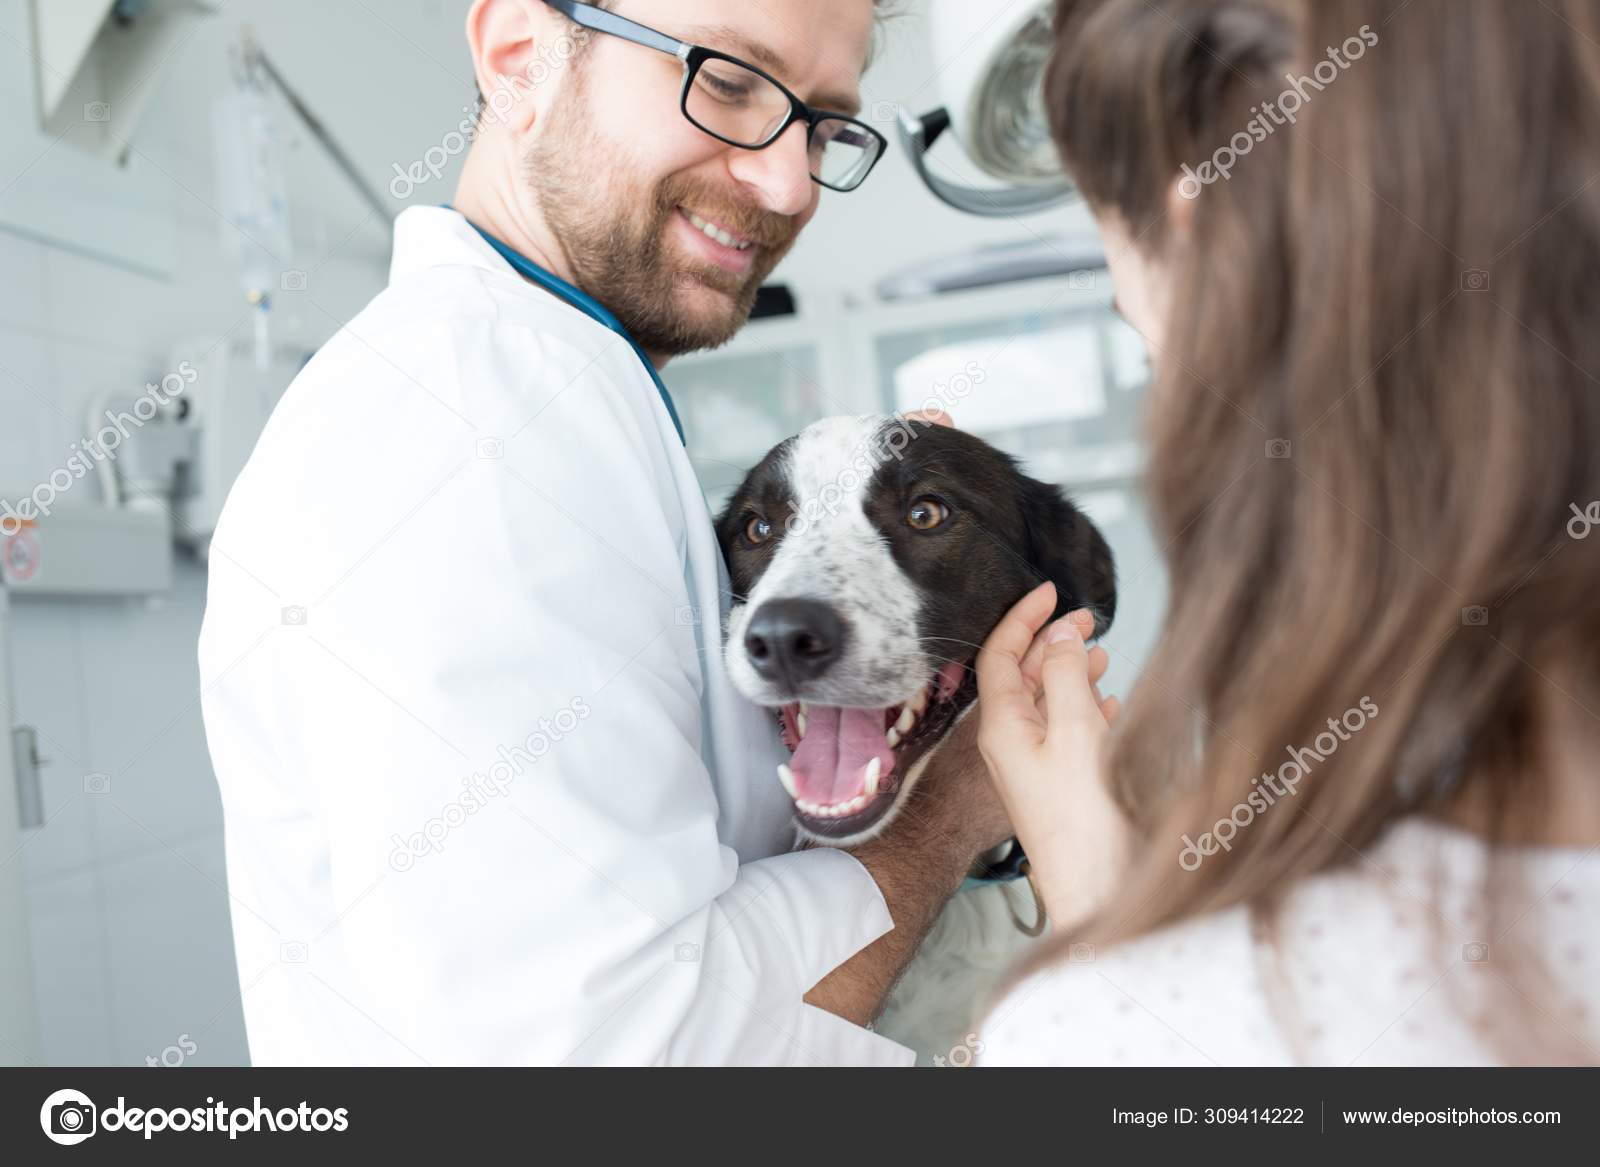 Veterinary and girl stroking dog at clinic Stock Photo by ©londondeposit  309414222